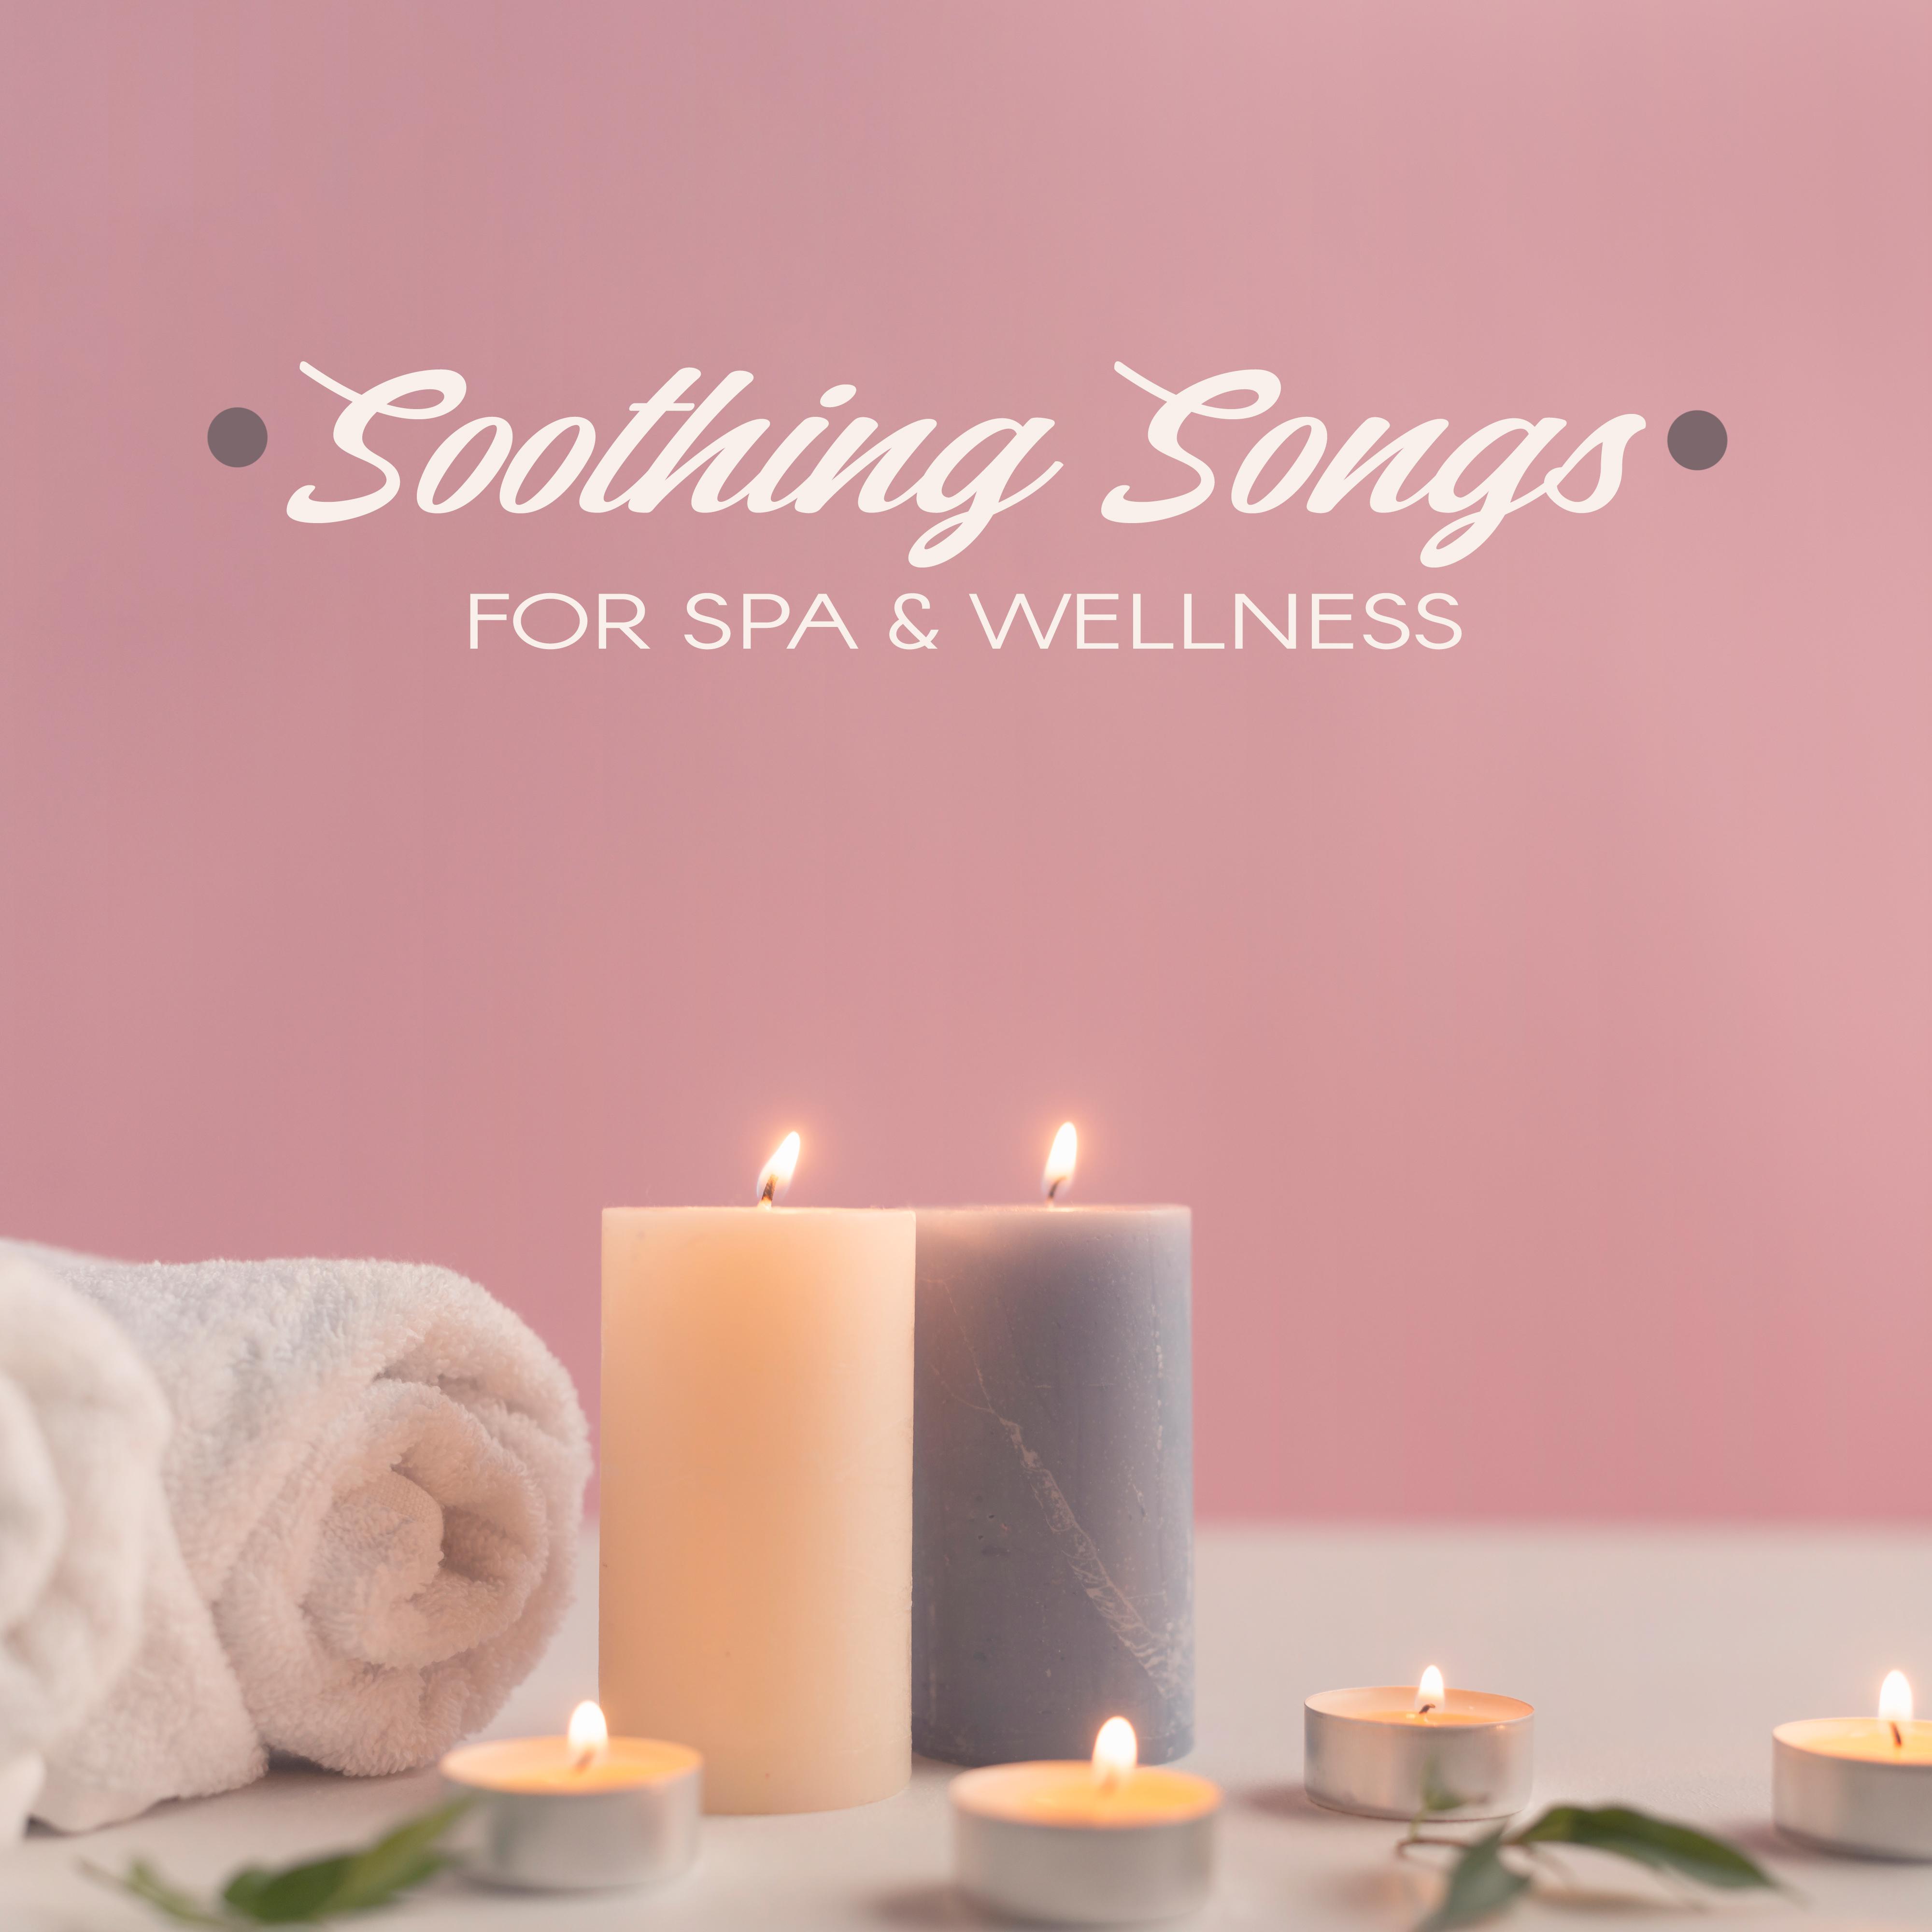 Soothing Songs for Spa & Wellness